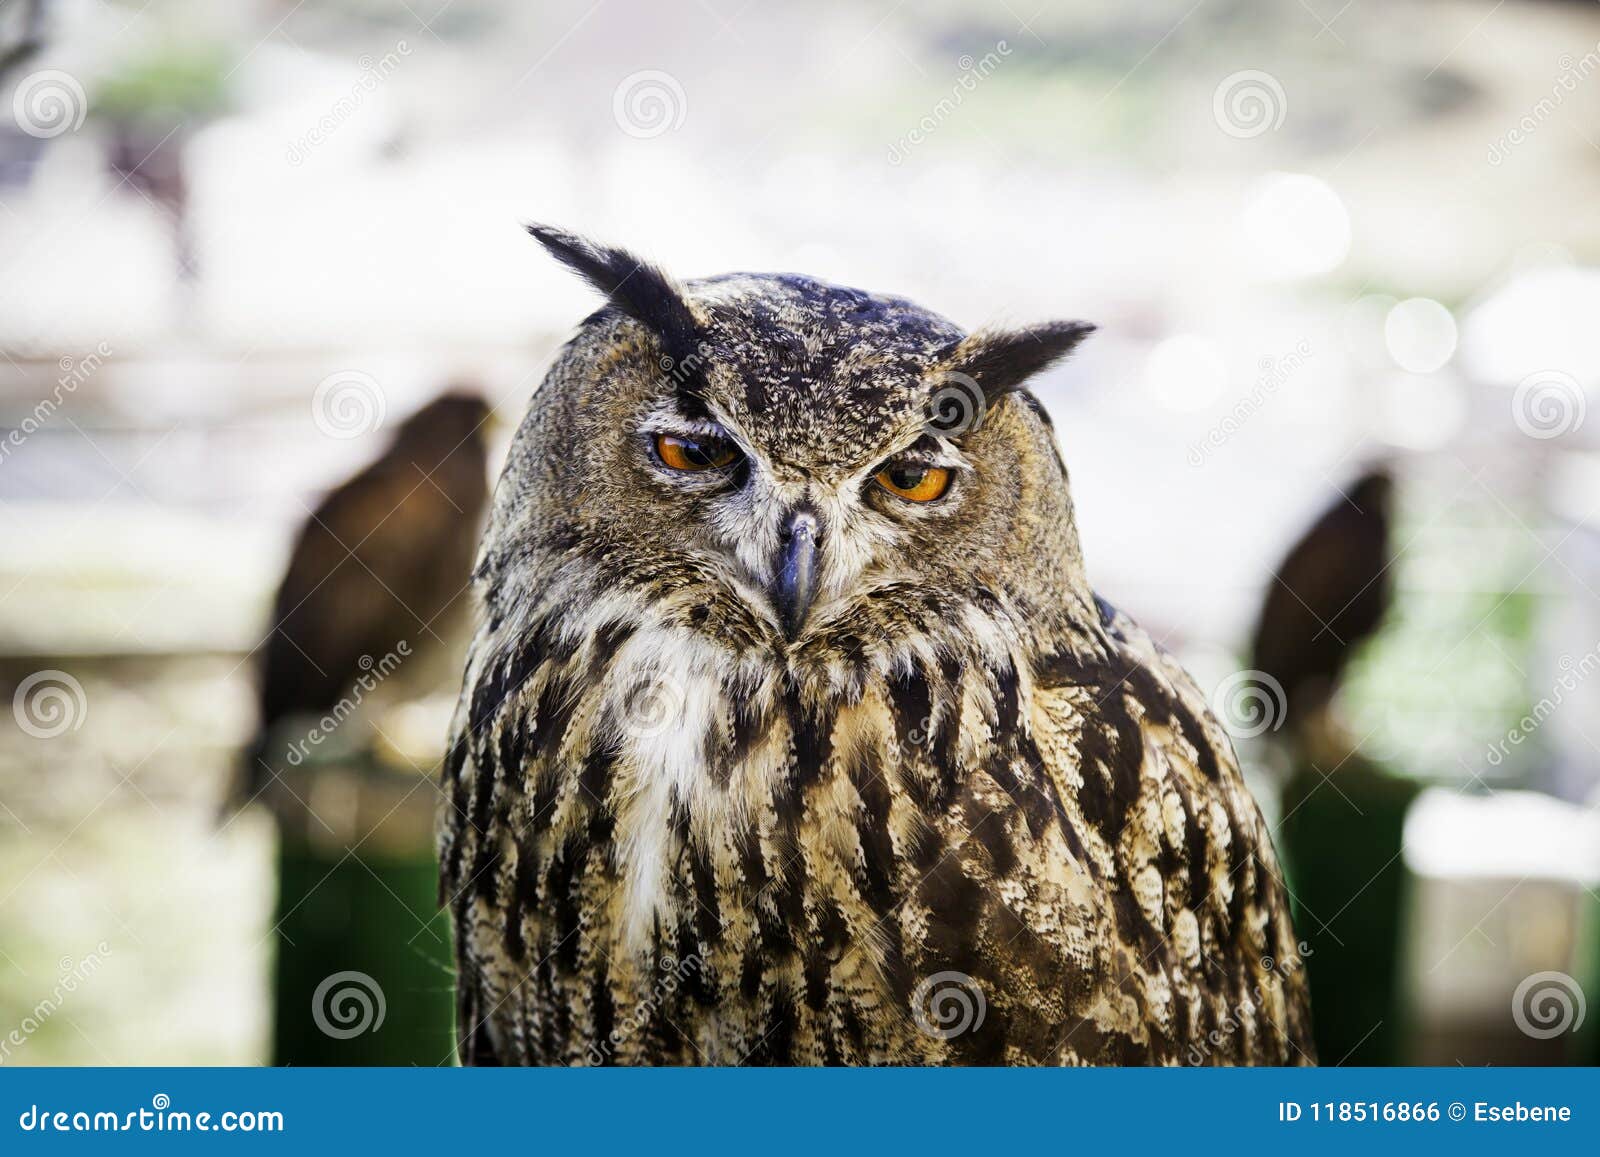 Royal Owl in a Display of Birds of Prey, Power and Size Stock Photo ...